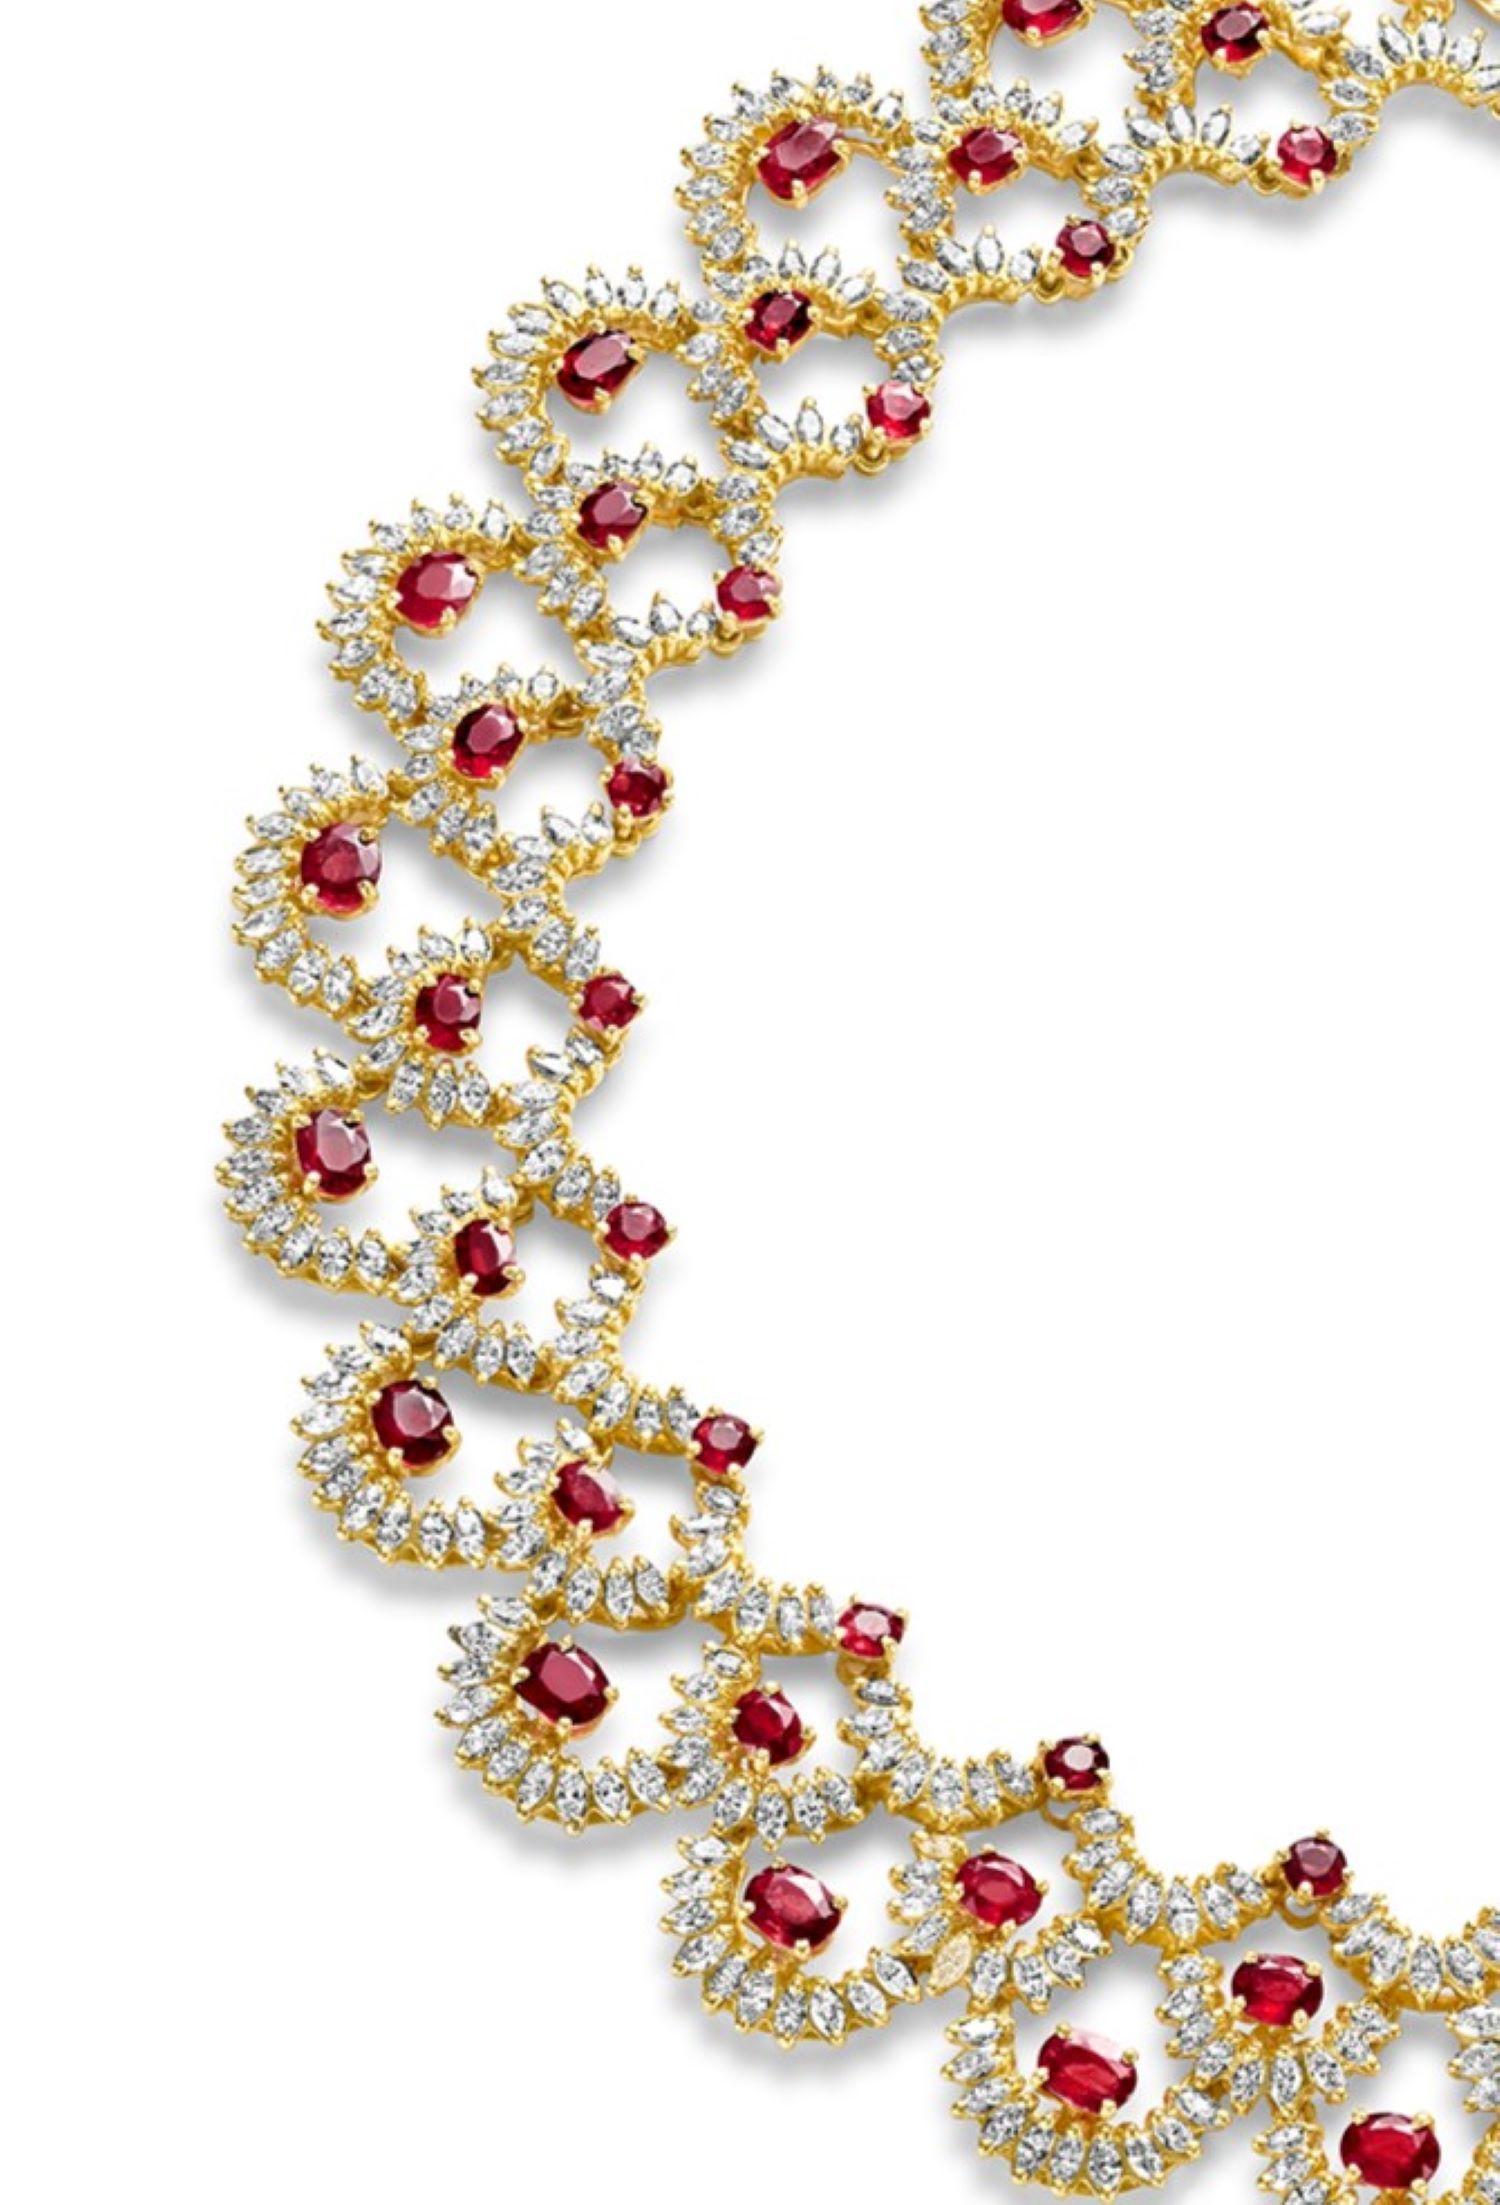 18kt Yellow Gold Choker Necklace 27ct. Rubies & 23ct. 676° Marquise Cut Diamonds For Sale 1